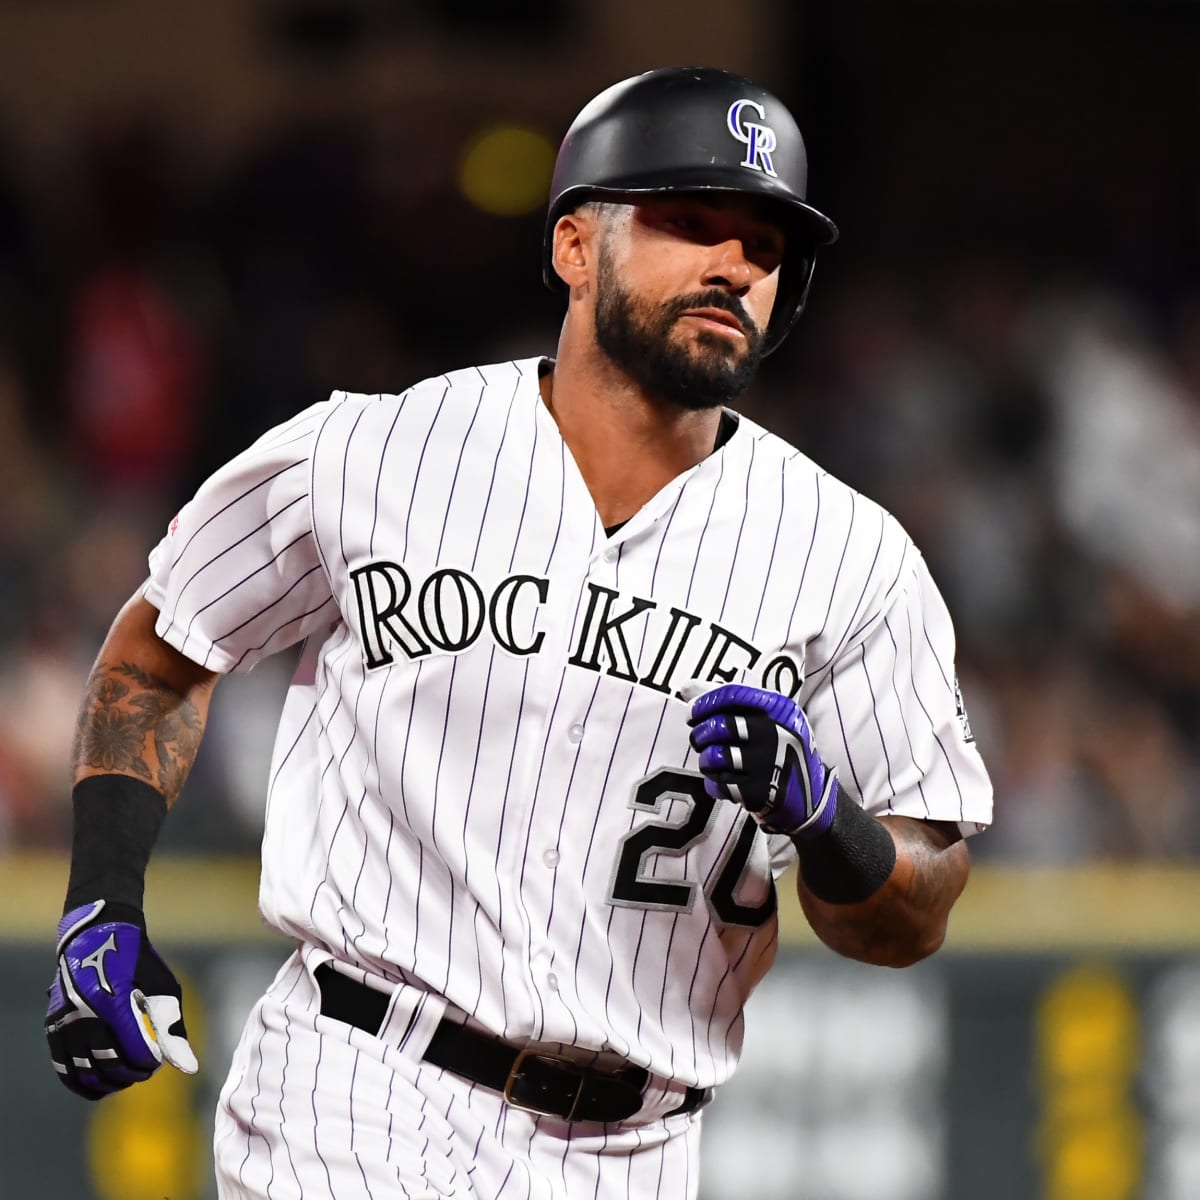 Rockies signed much more than a baseball player in Ian Desmond